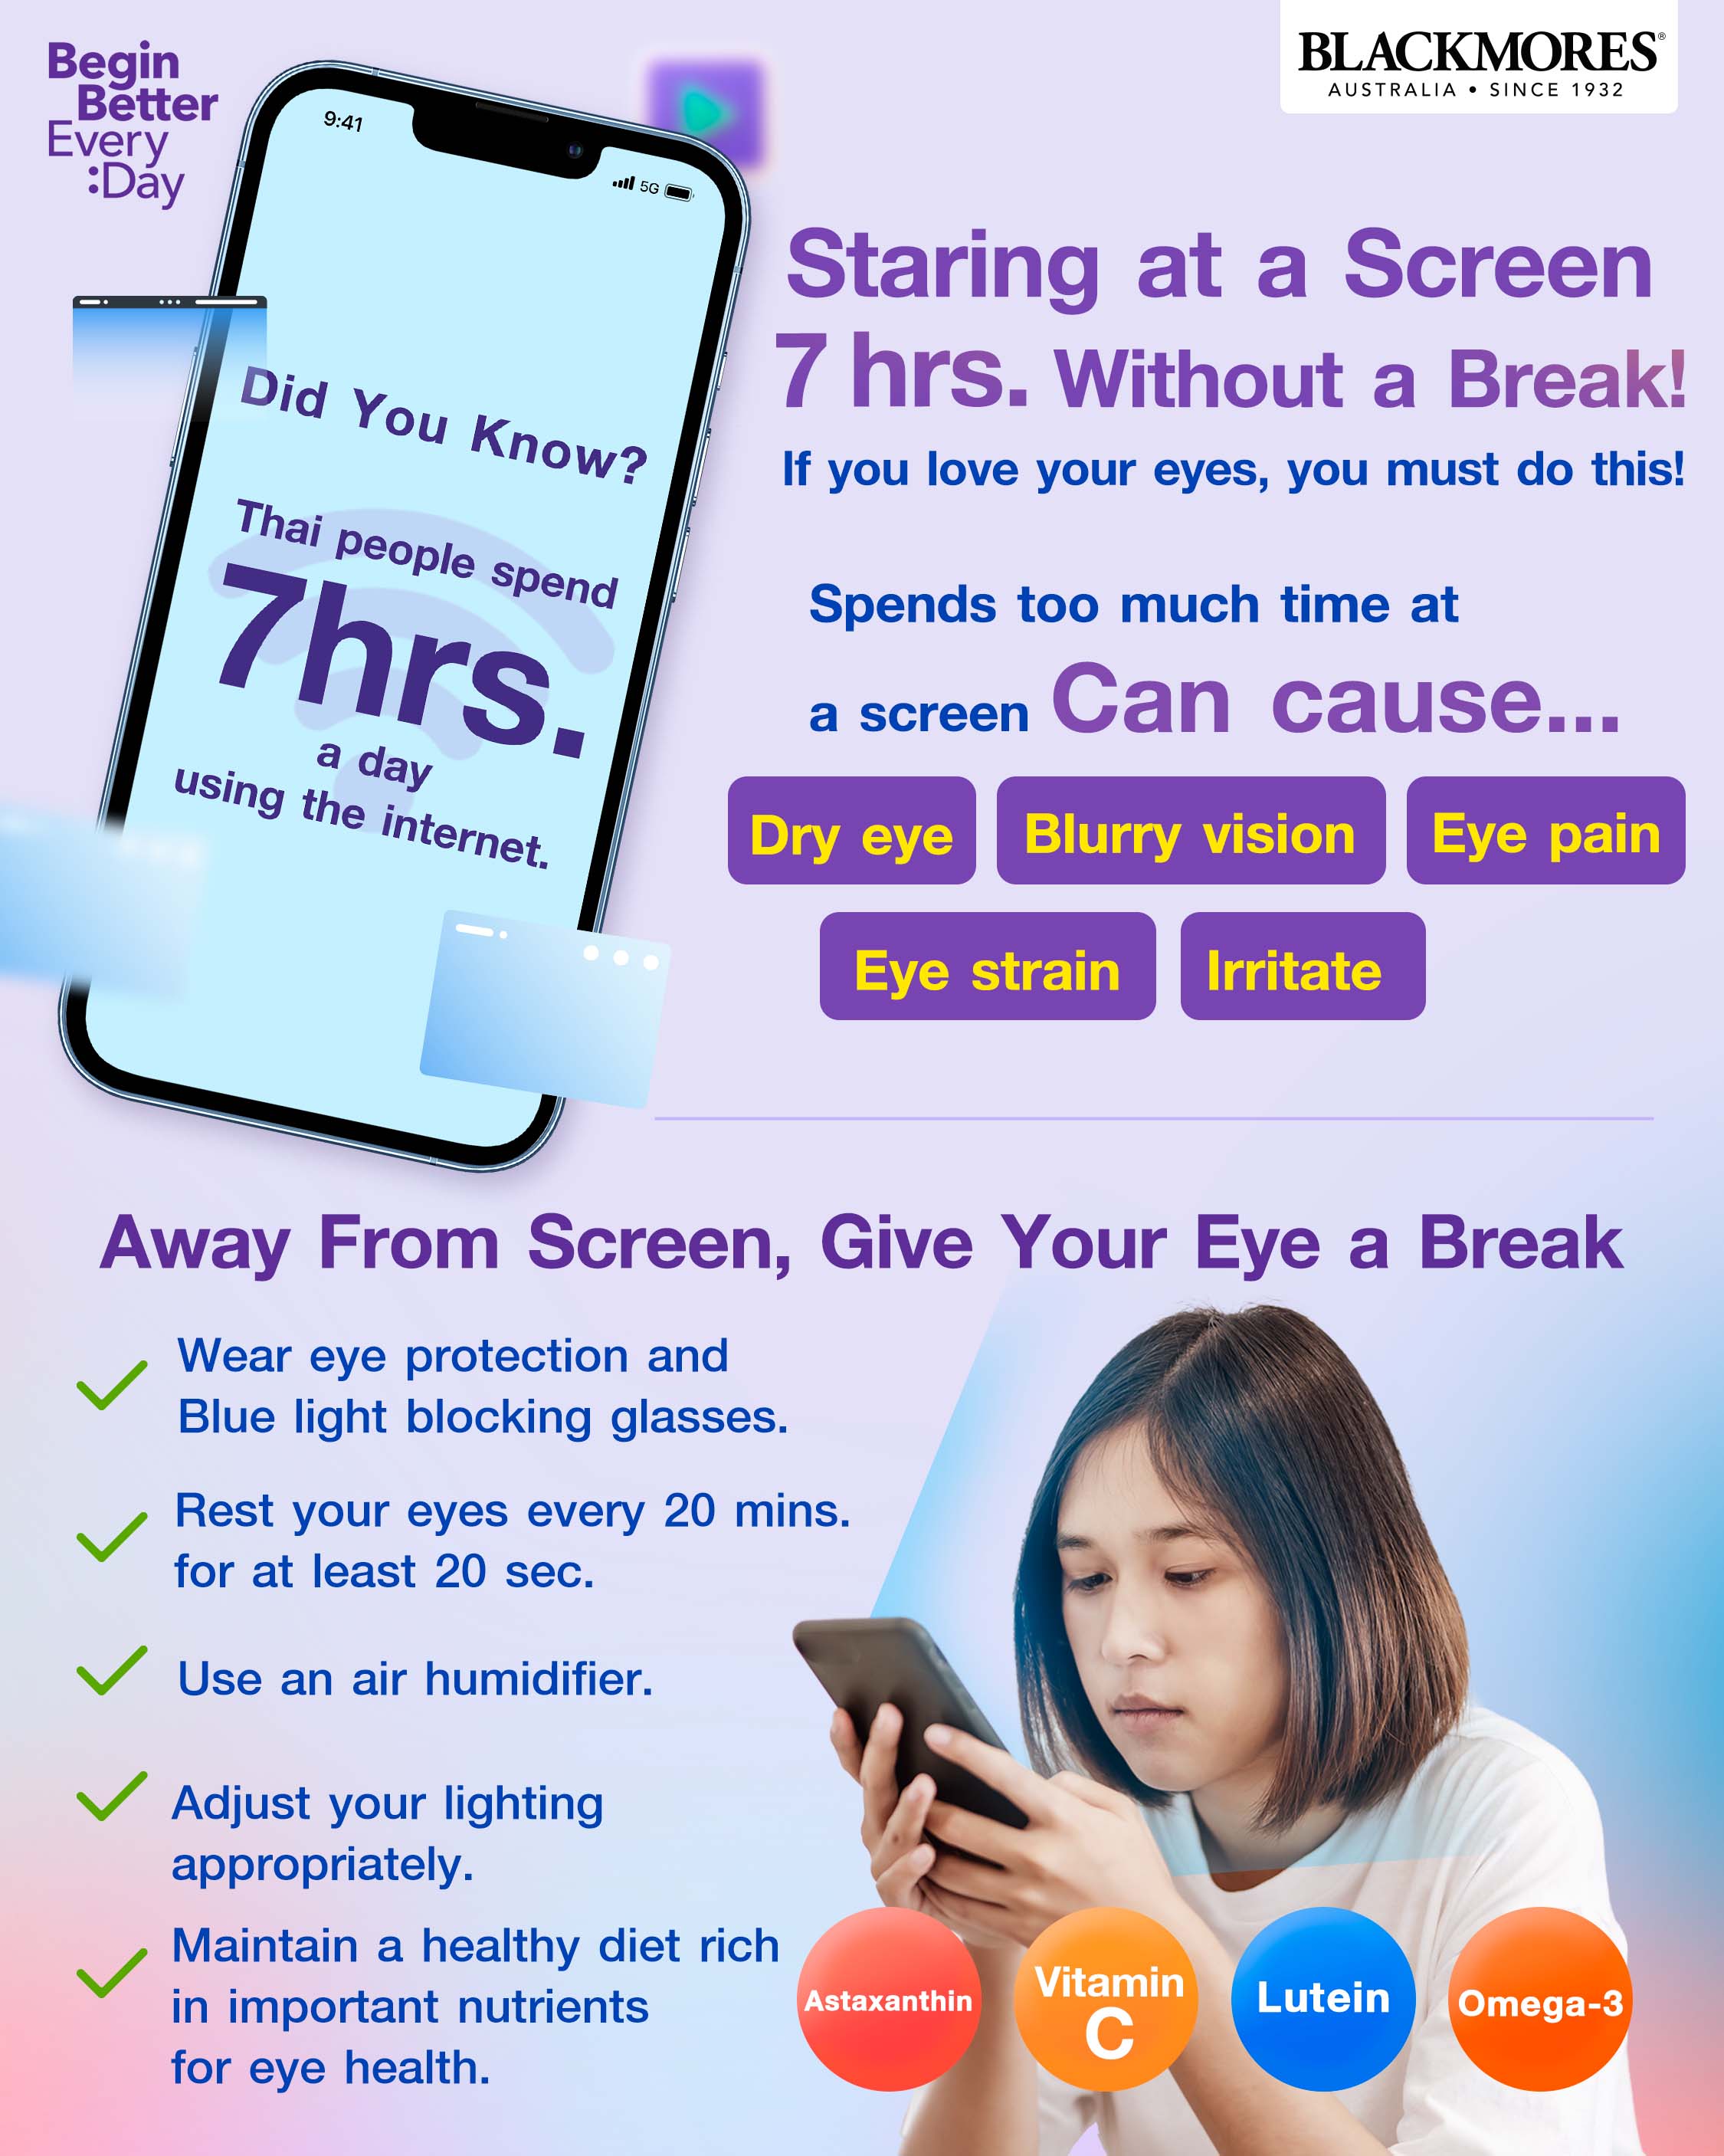 How Your Screen Tume Affects Your Eye Health